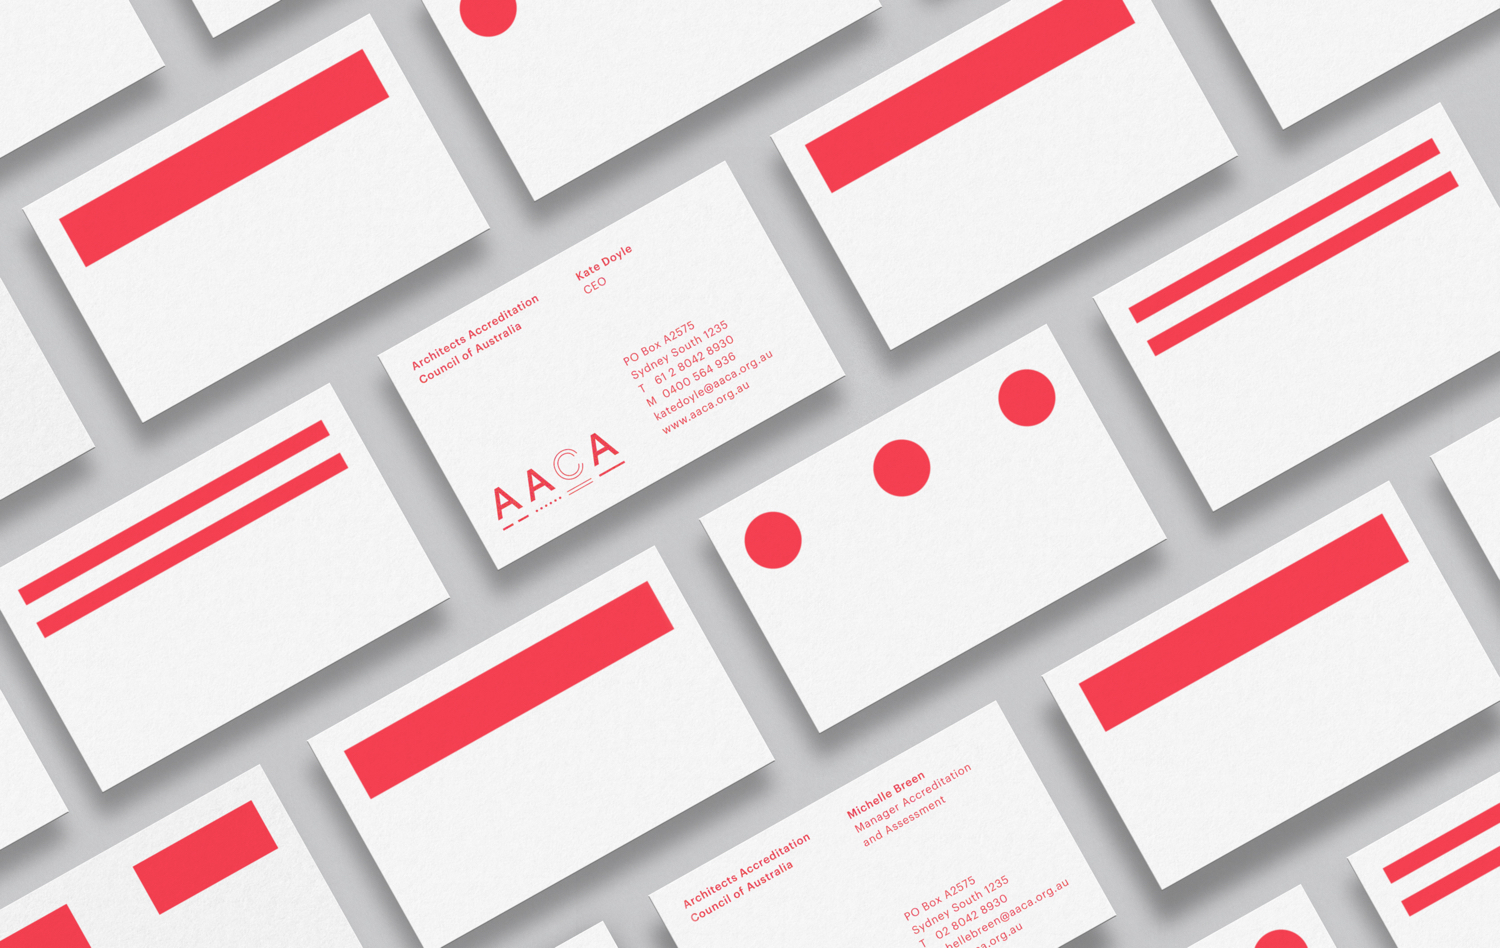 Graphic identity and business cards designed by Sydney-based Toko for Architects Accreditation Council Of Australia